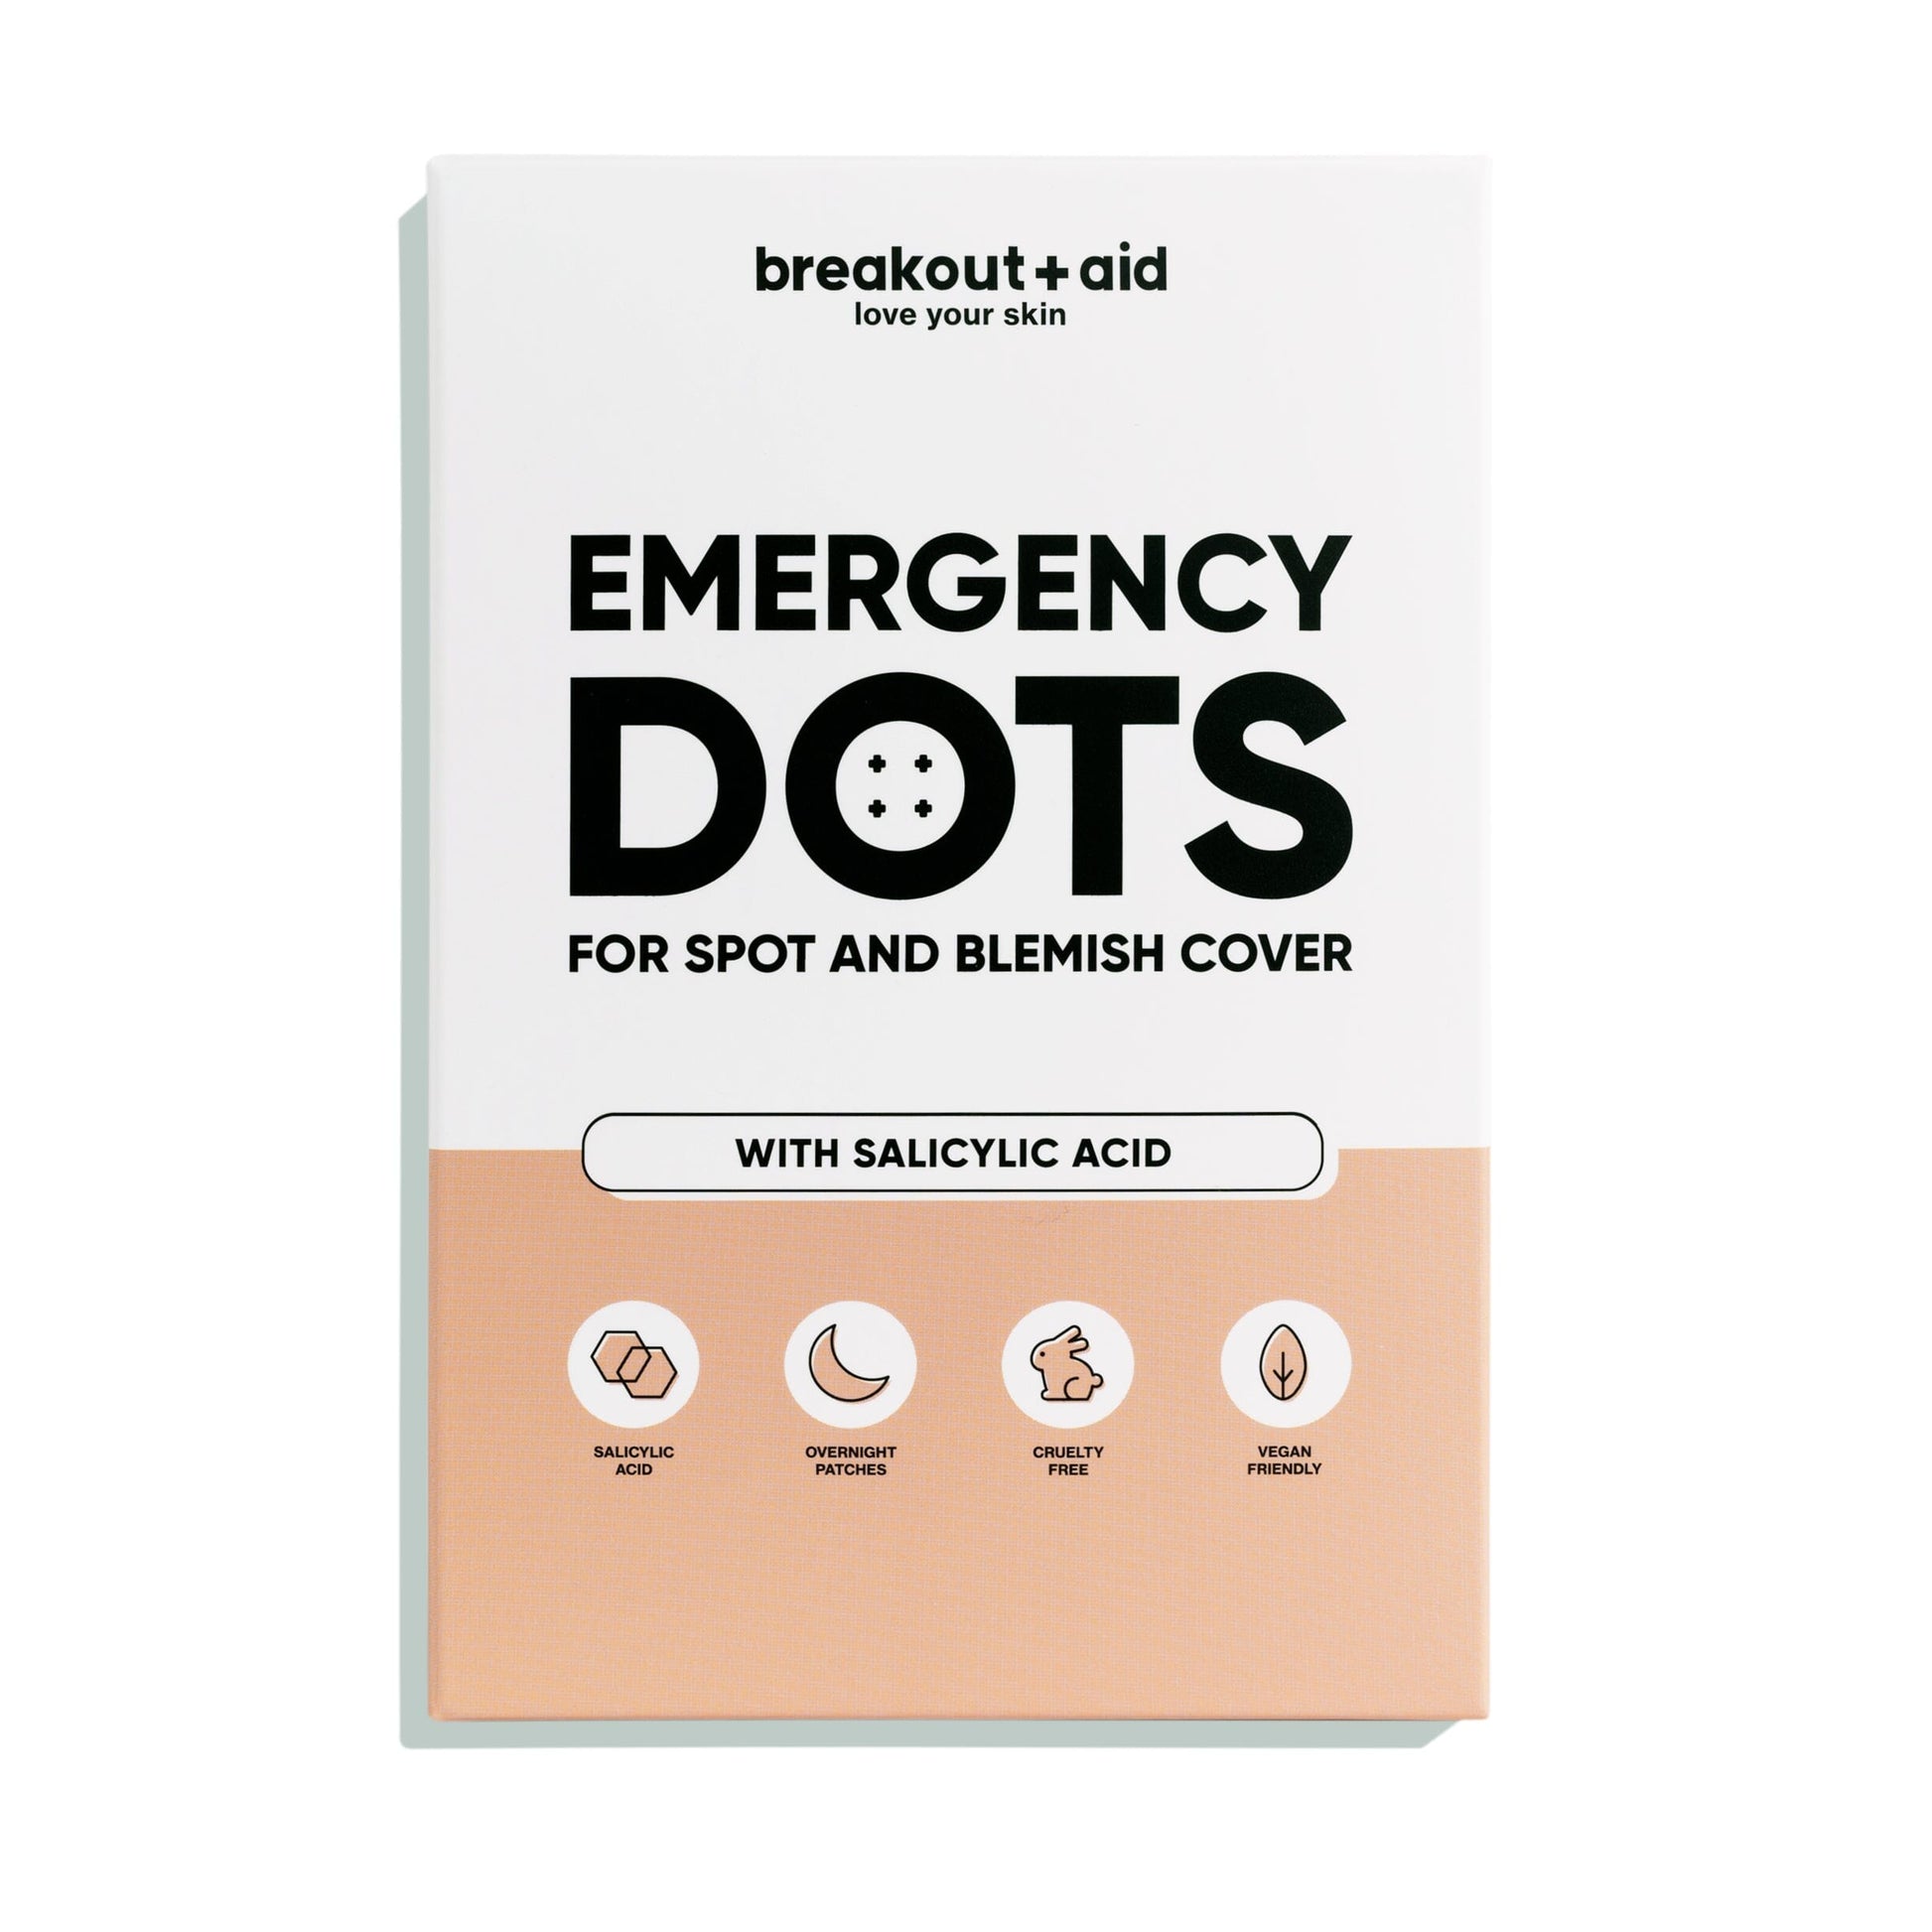 Emergency dots for spots and blemishes with Salicylic Acid breakoutaid store 